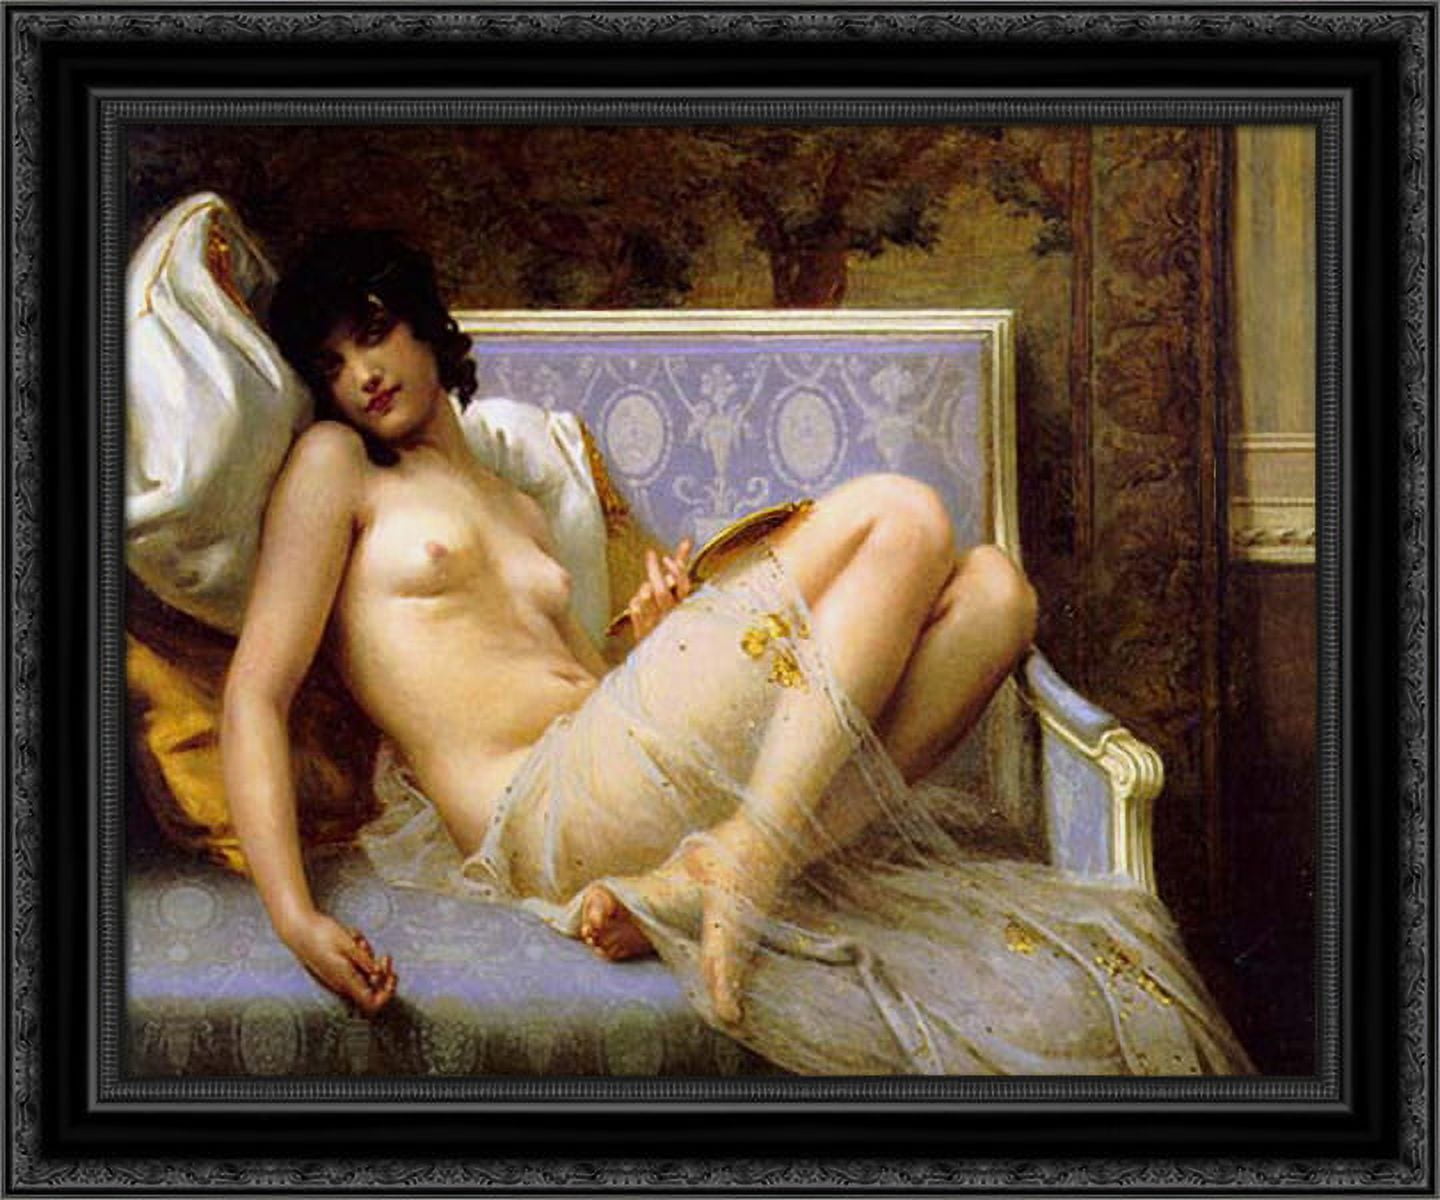 Young woman naked on a settee 24x20 Black Ornate Wood Framed Canvas Art by Seignac, Guillaume picture